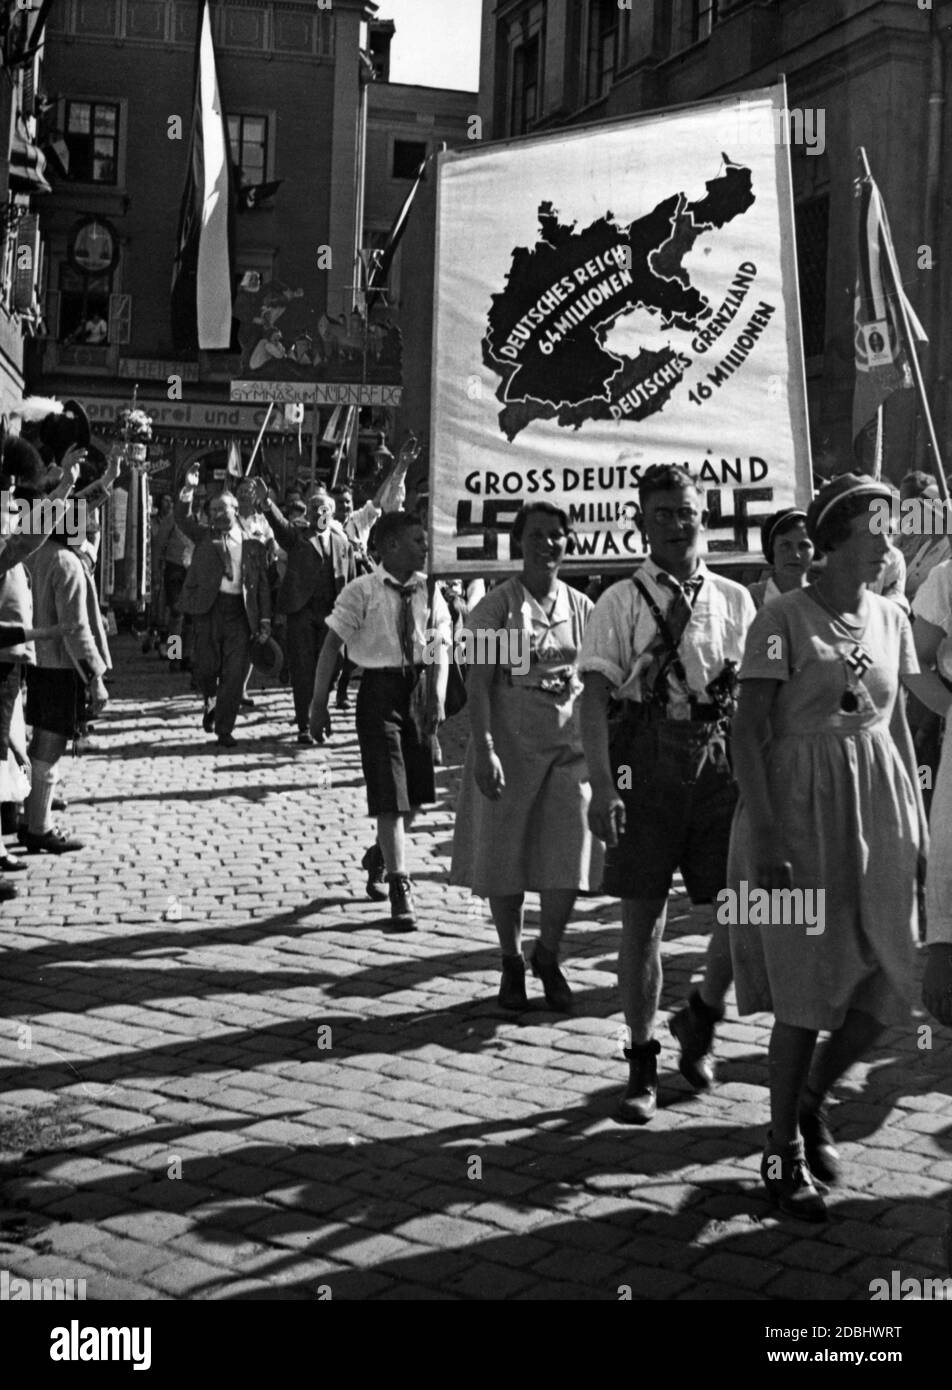 During a march in Passau, demonstrators hold up a banner demanding a Greater Germany. The map shows the areas of Alsace Lorraine, parts of Switzerland and Austria, the Sudetenland, Upper Silesia, West Prussia and Poznan for a Greater Germany. Stock Photo